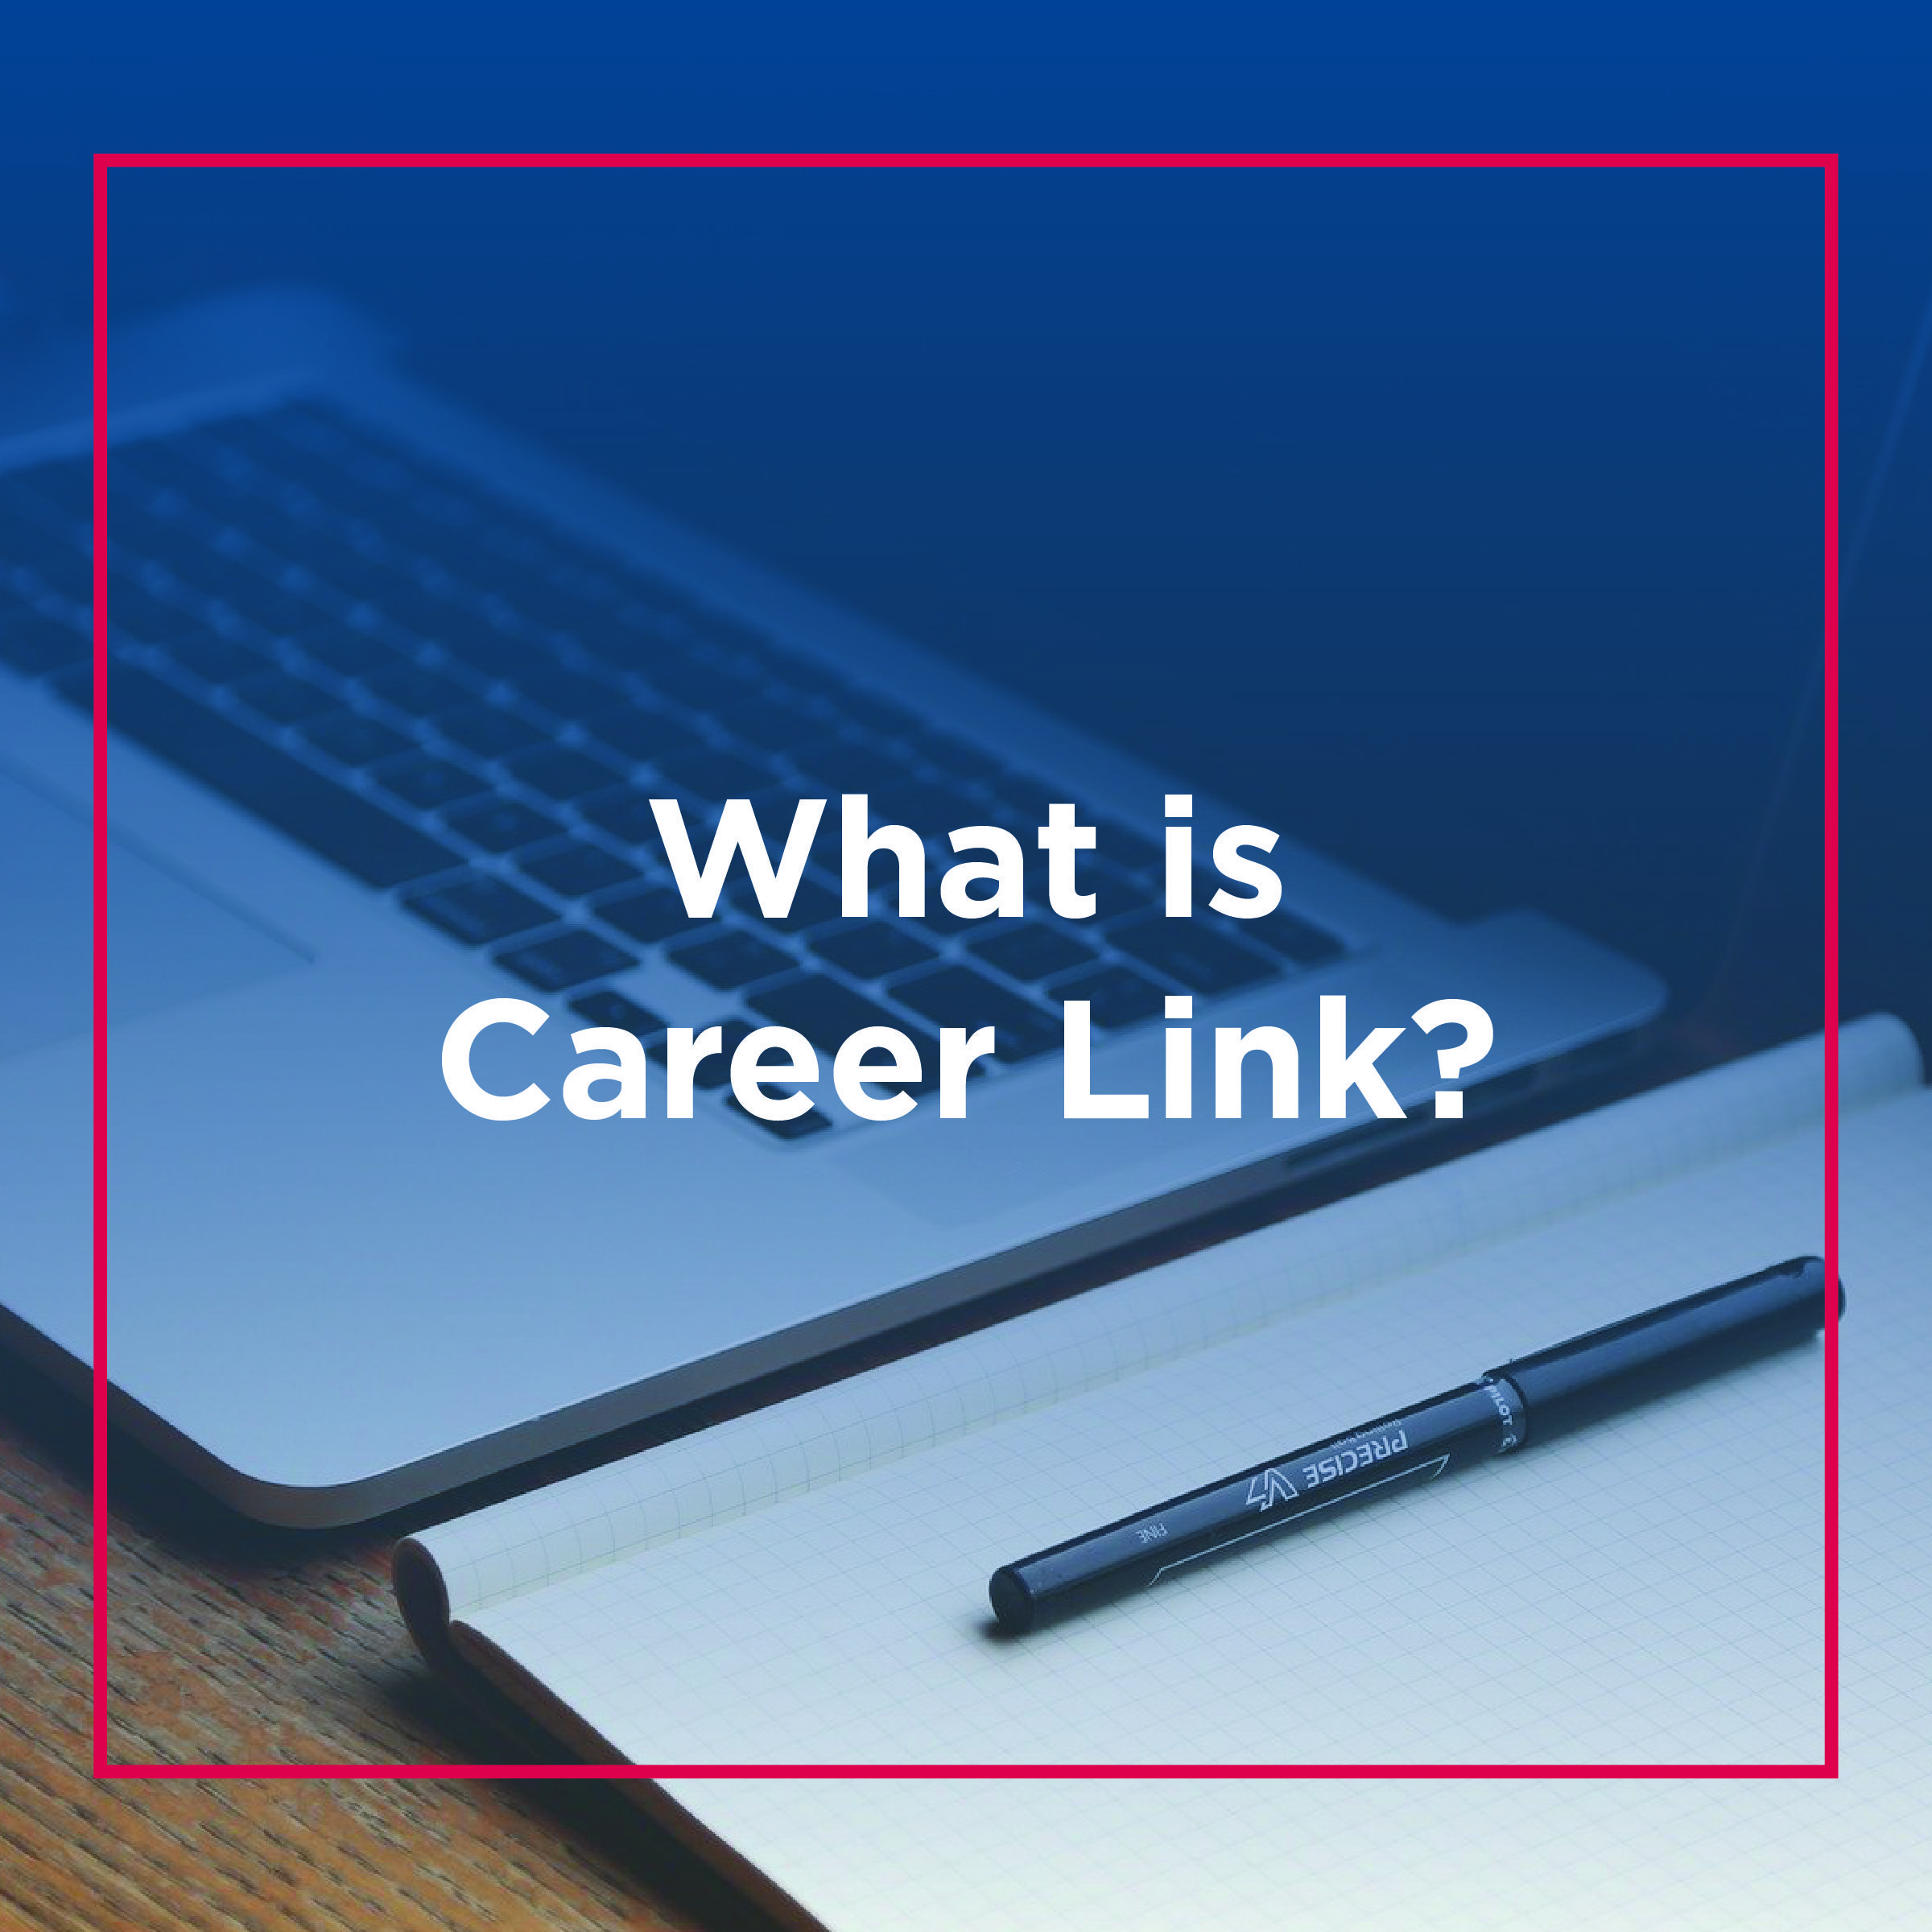 What is Career Link